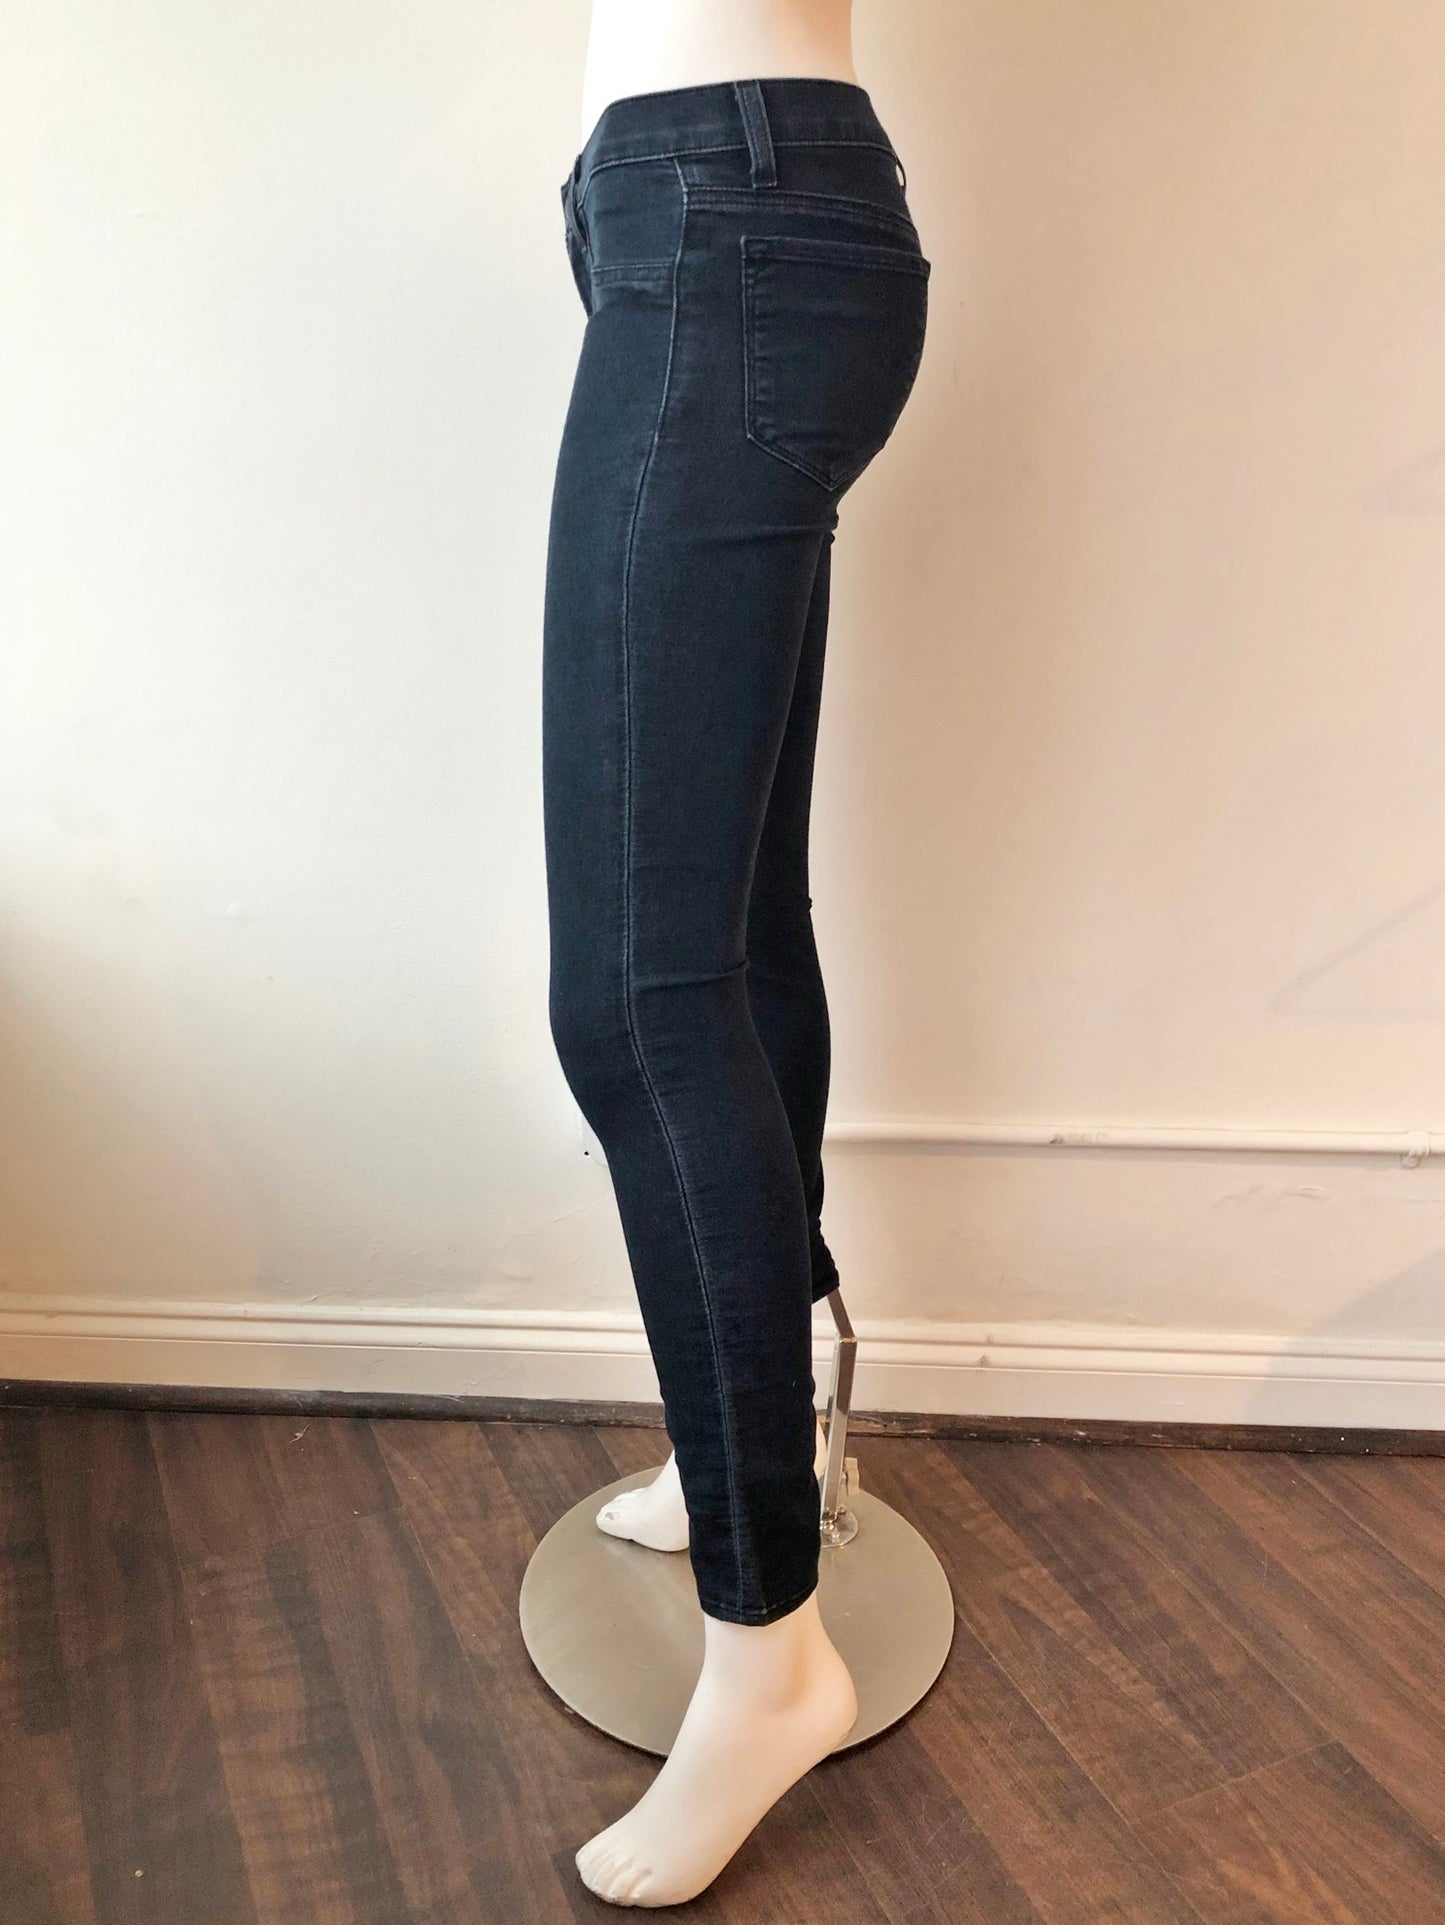 Olympia Low Rise Skinny Jeans Size 26